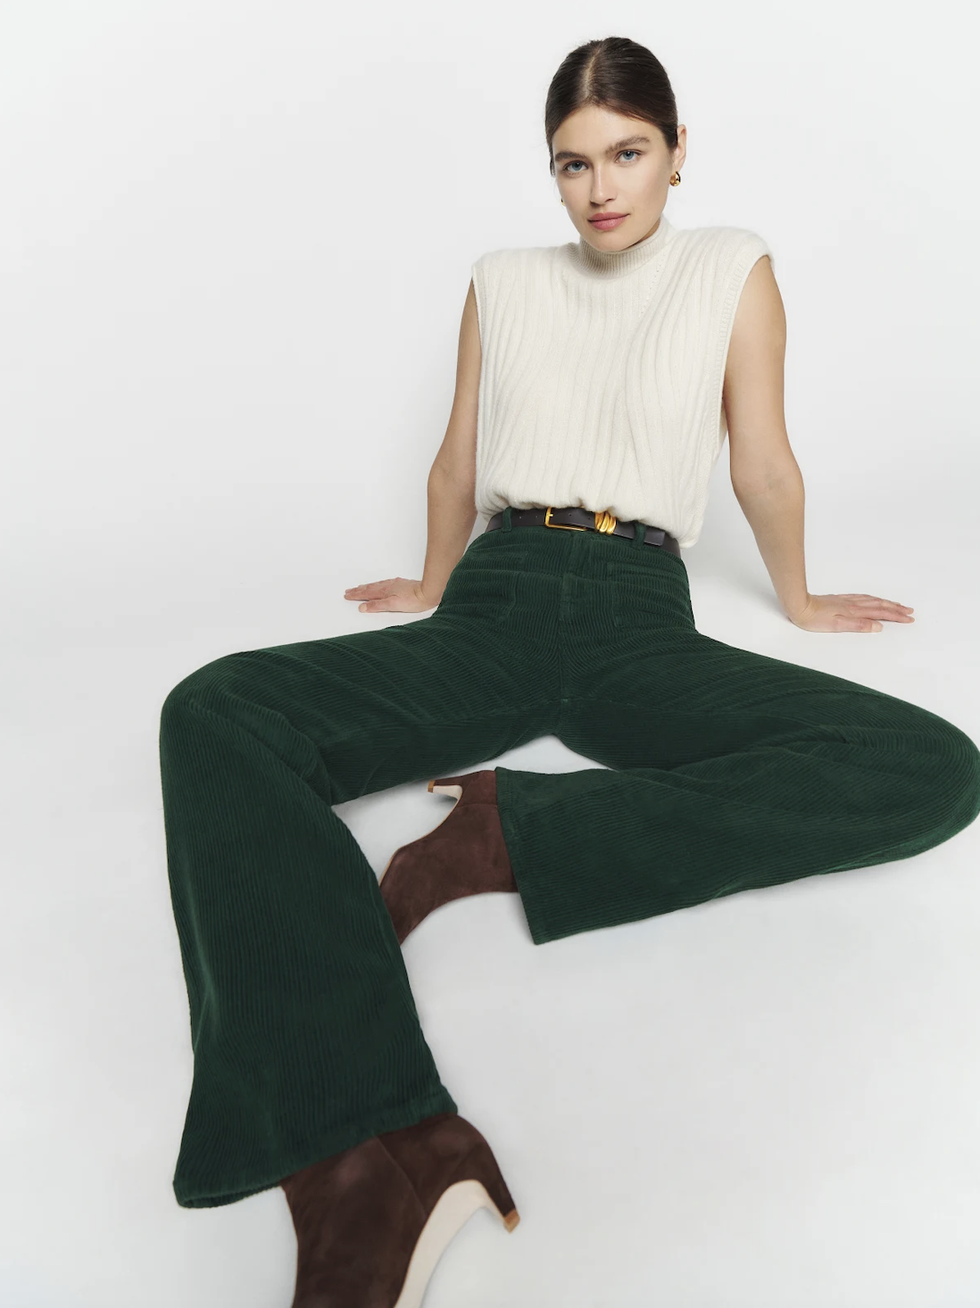 What Are the Best Corduroy Pants for Women?